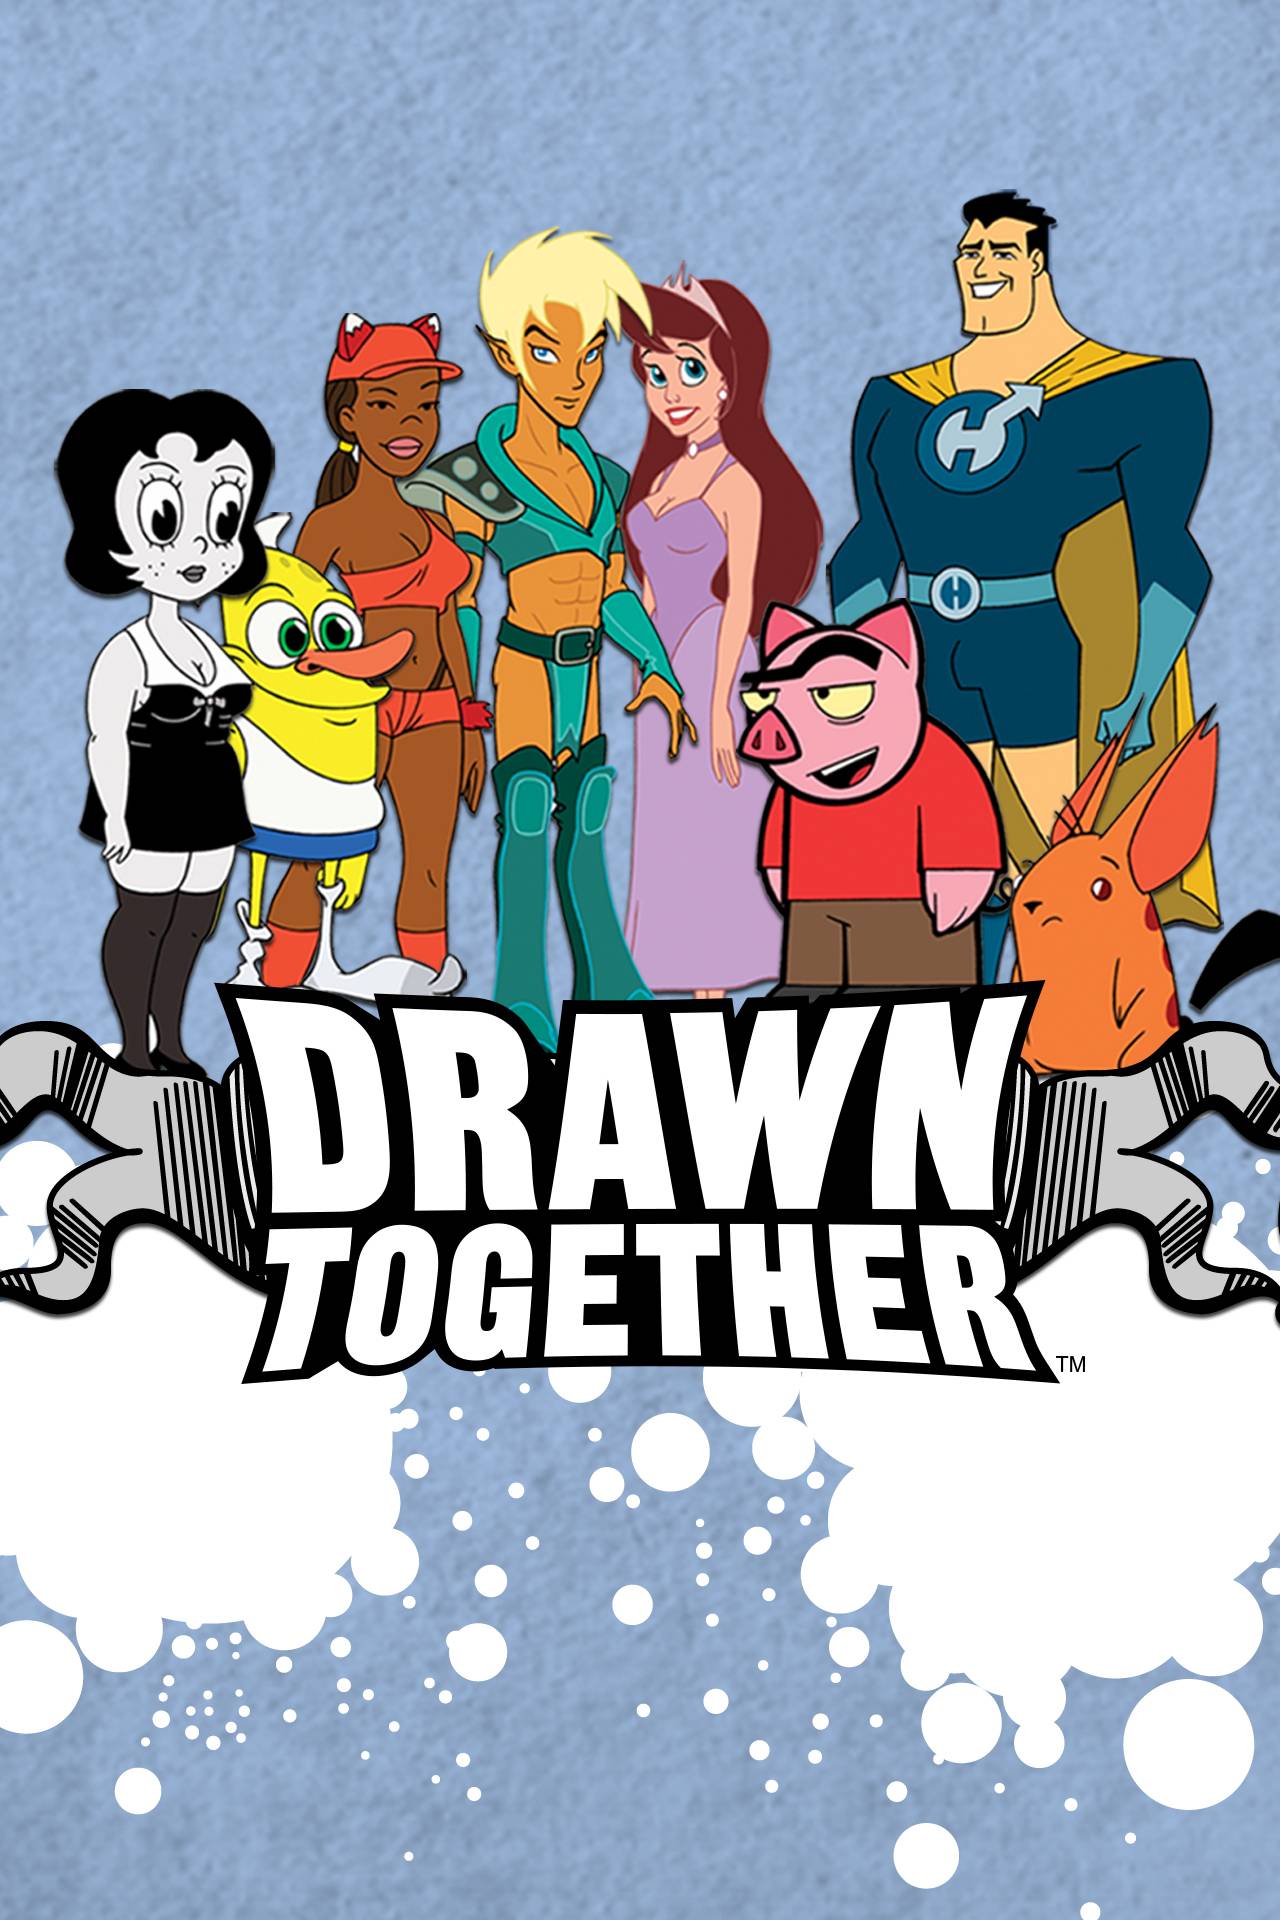 Drawn Together - TV Series | Comedy Central US